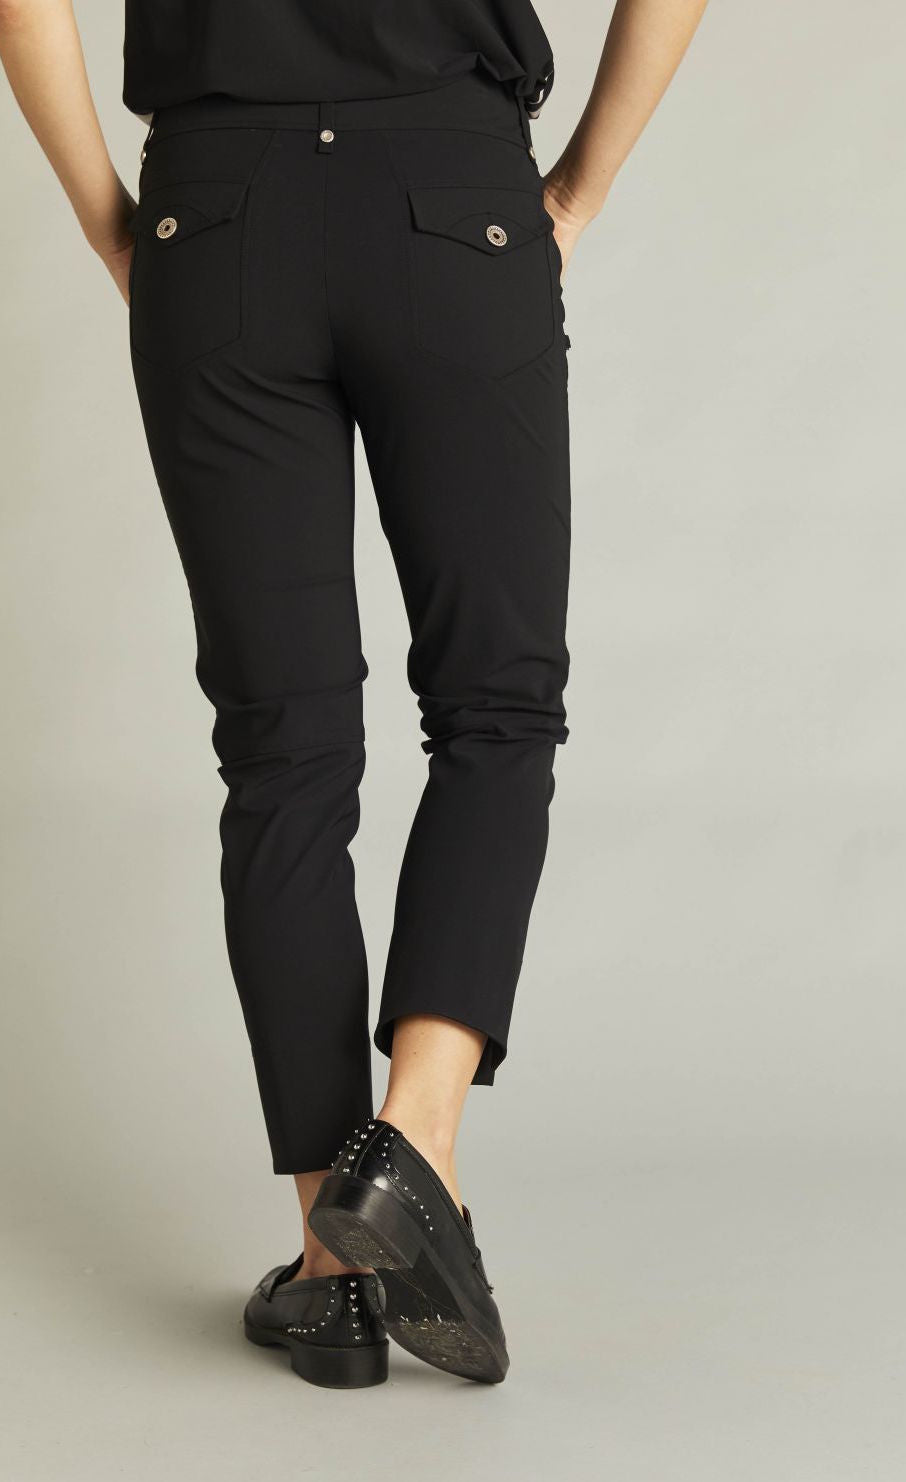 Back bottom half view of a woman wearing the black indies epatant pants. These pants have two flap back pockets.